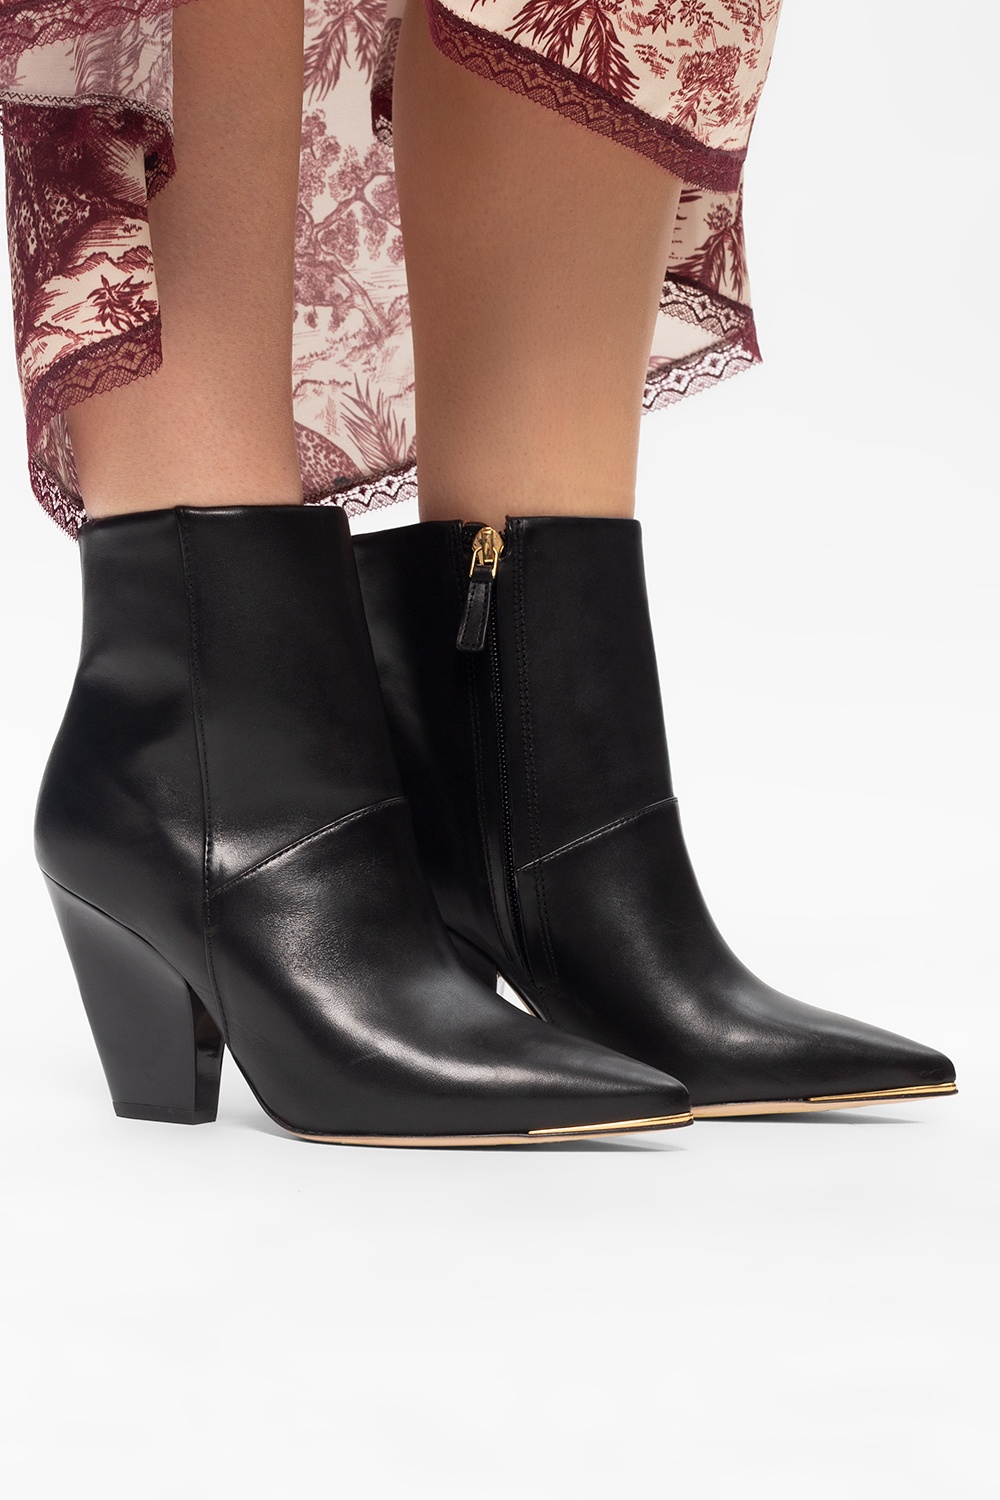 Top 50+ imagen lila pointed toe bootie tory burch